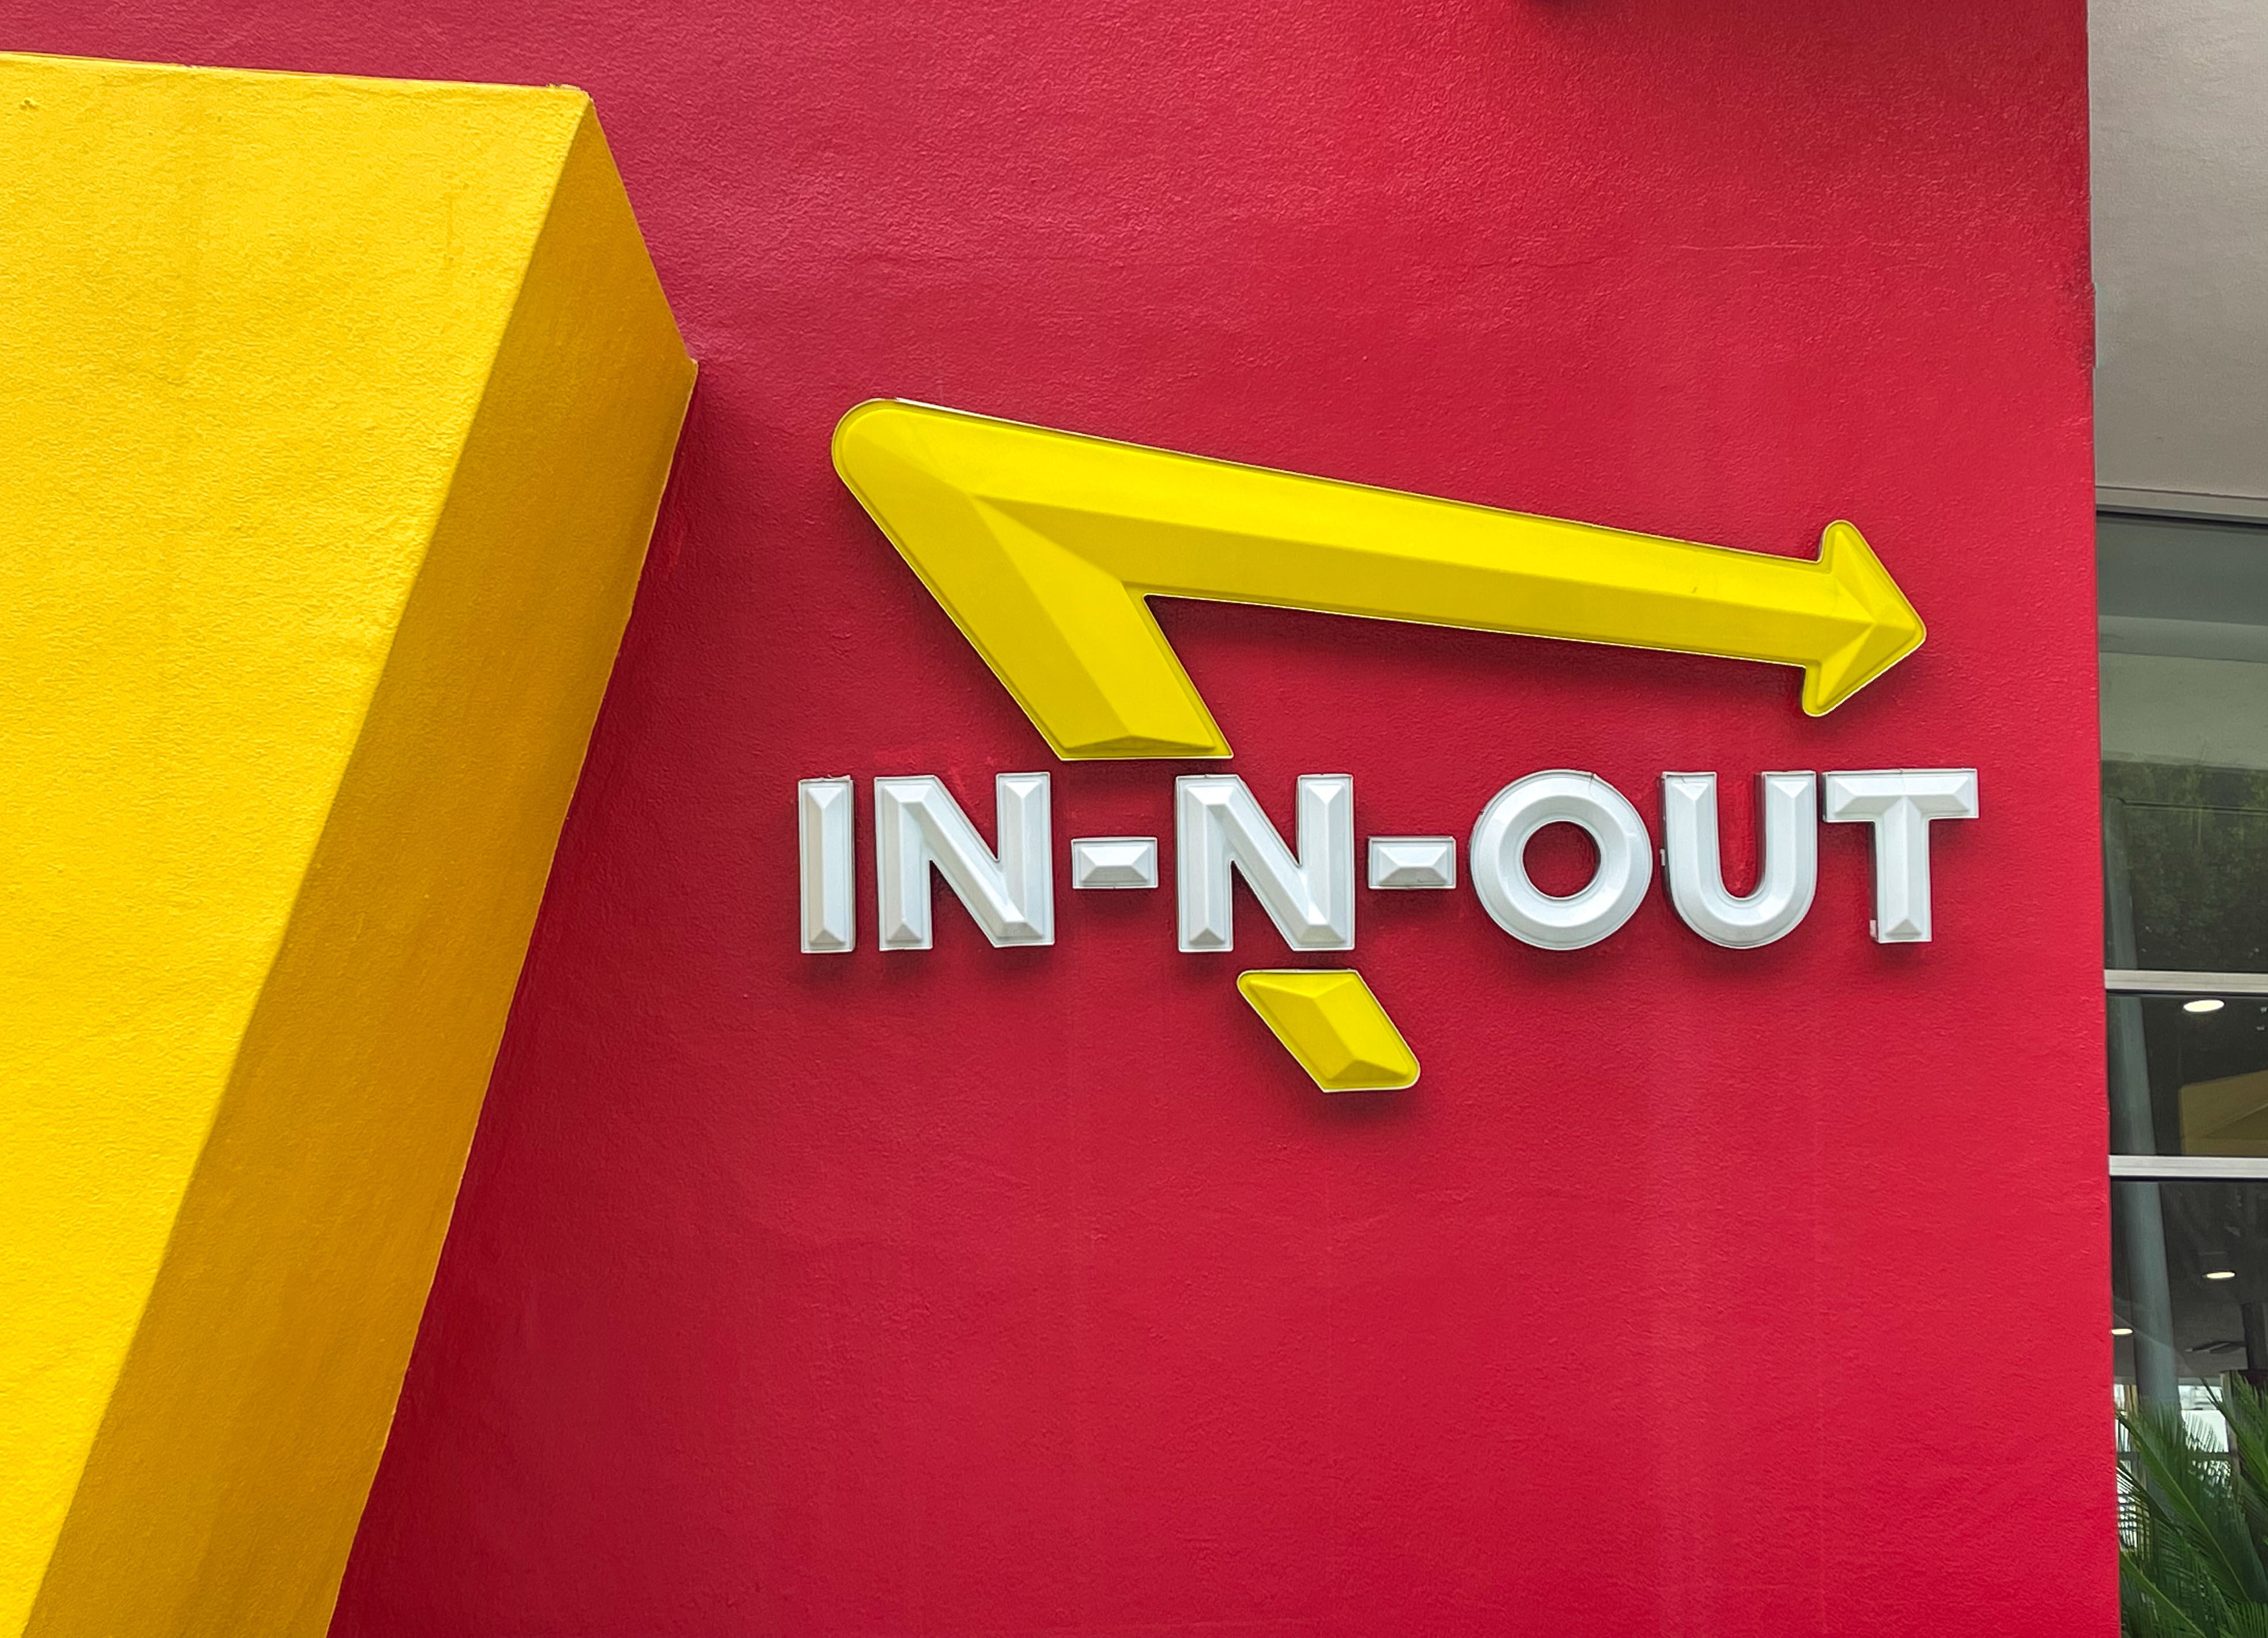 The exterior of an In-N-Out restaurant where just the logo is visible